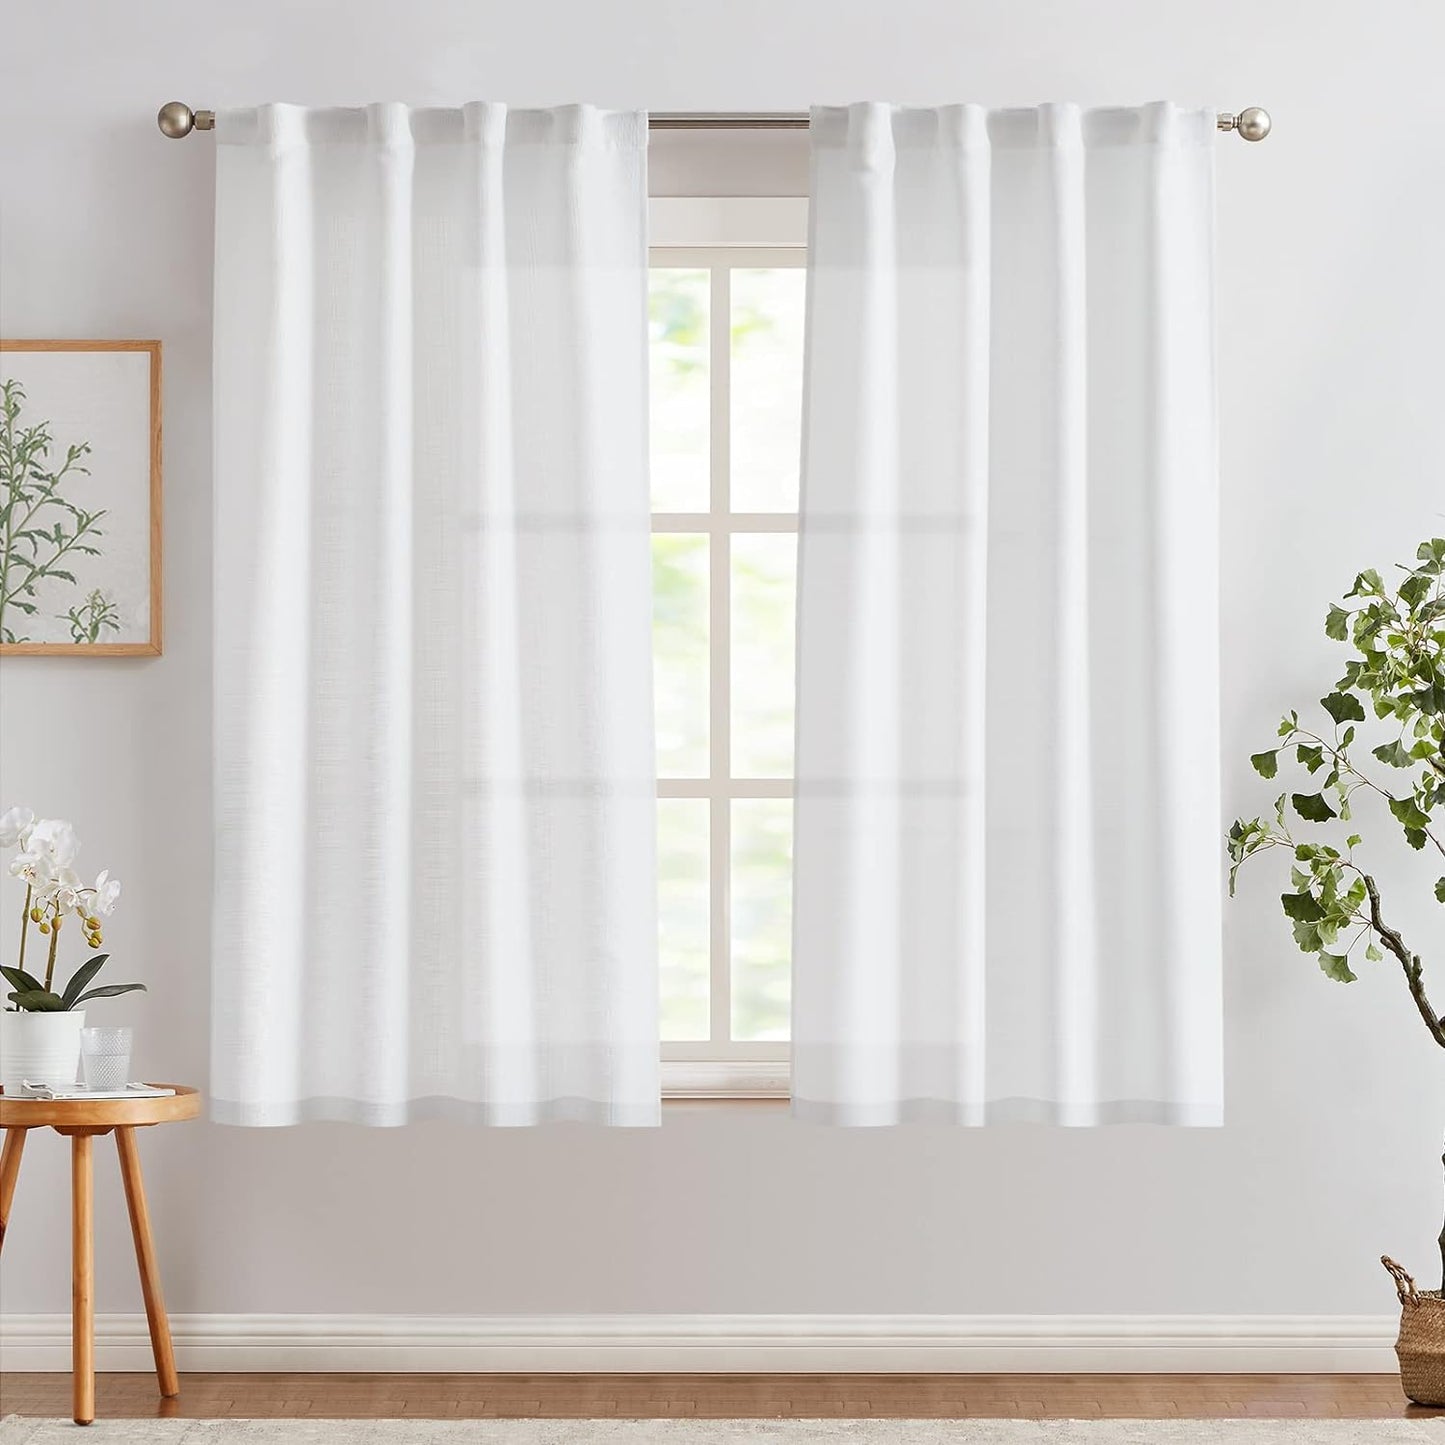 COLLACT White Linen Textured Curtains 84 Inch Length 2 Panels for Living Room Casual Weave Light Filtering Semi Sheer Curtains & Drapes for Bedroom Grommet Top Window Treatments, W38 X L84, White  COLLACT Rod Pocket | Textured White W38 X L63 